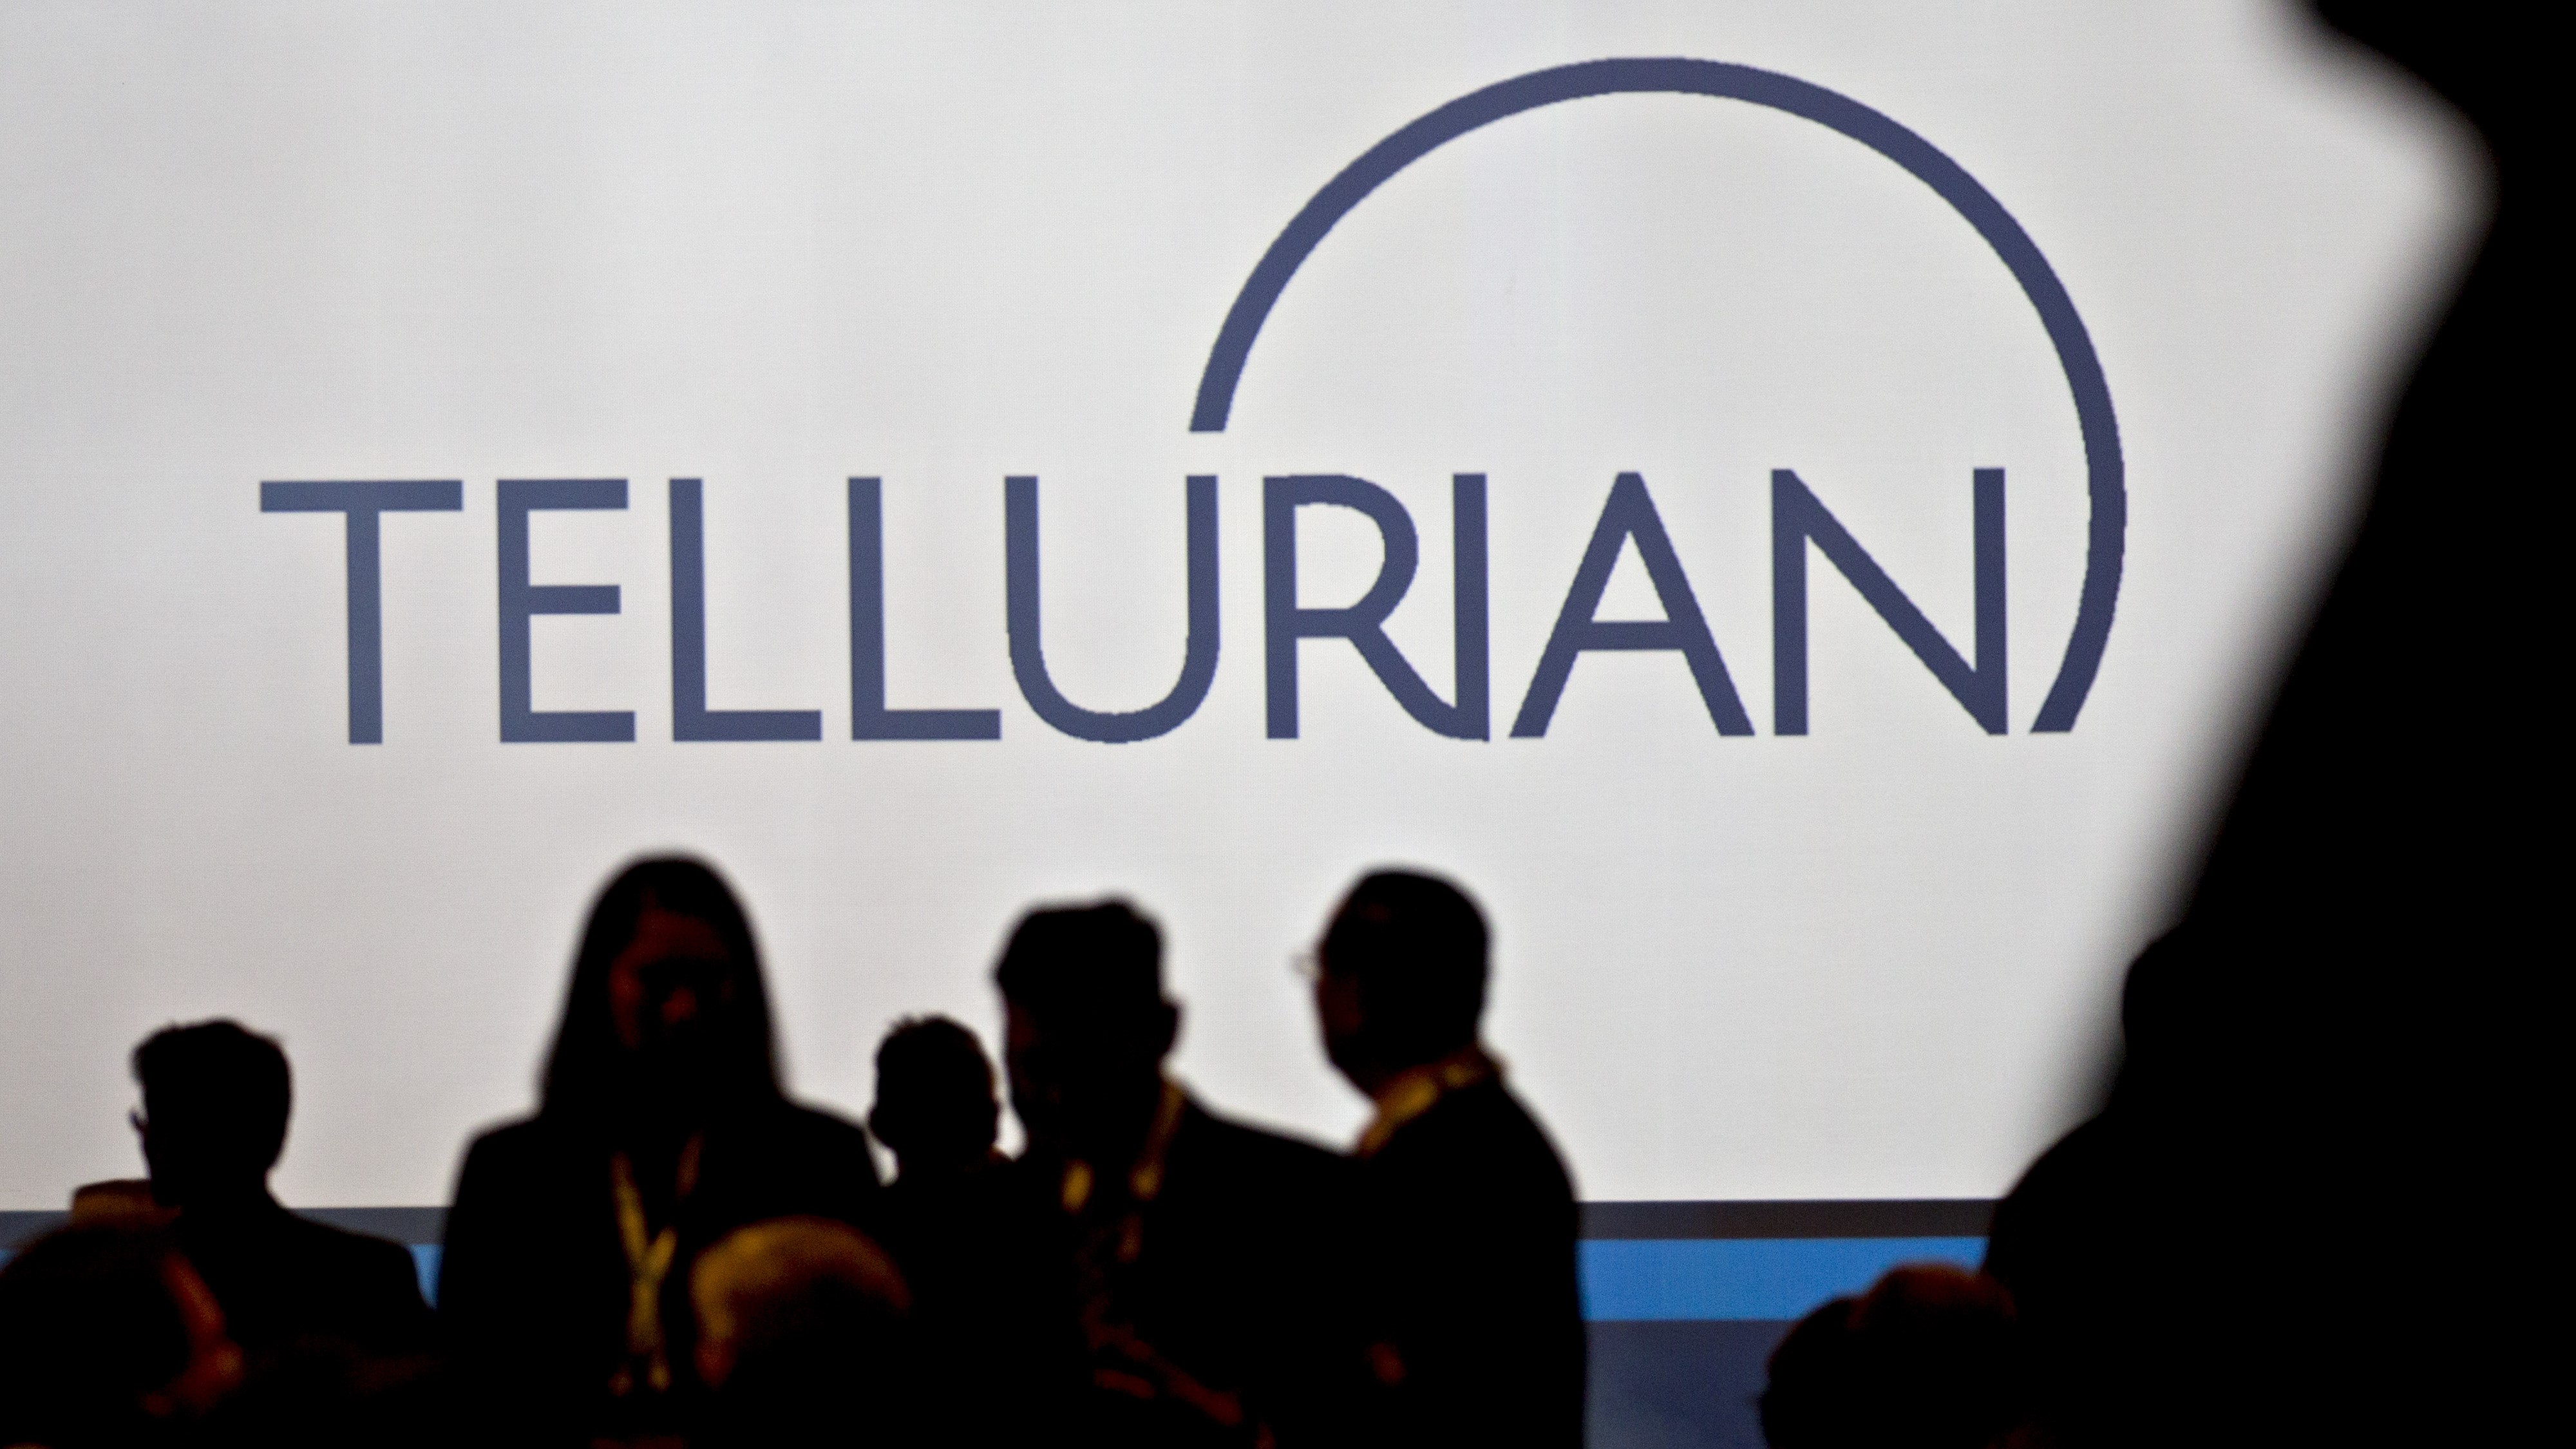 Watch Tellurian Closer to Securing LNG Project Funding Souki Bloomberg